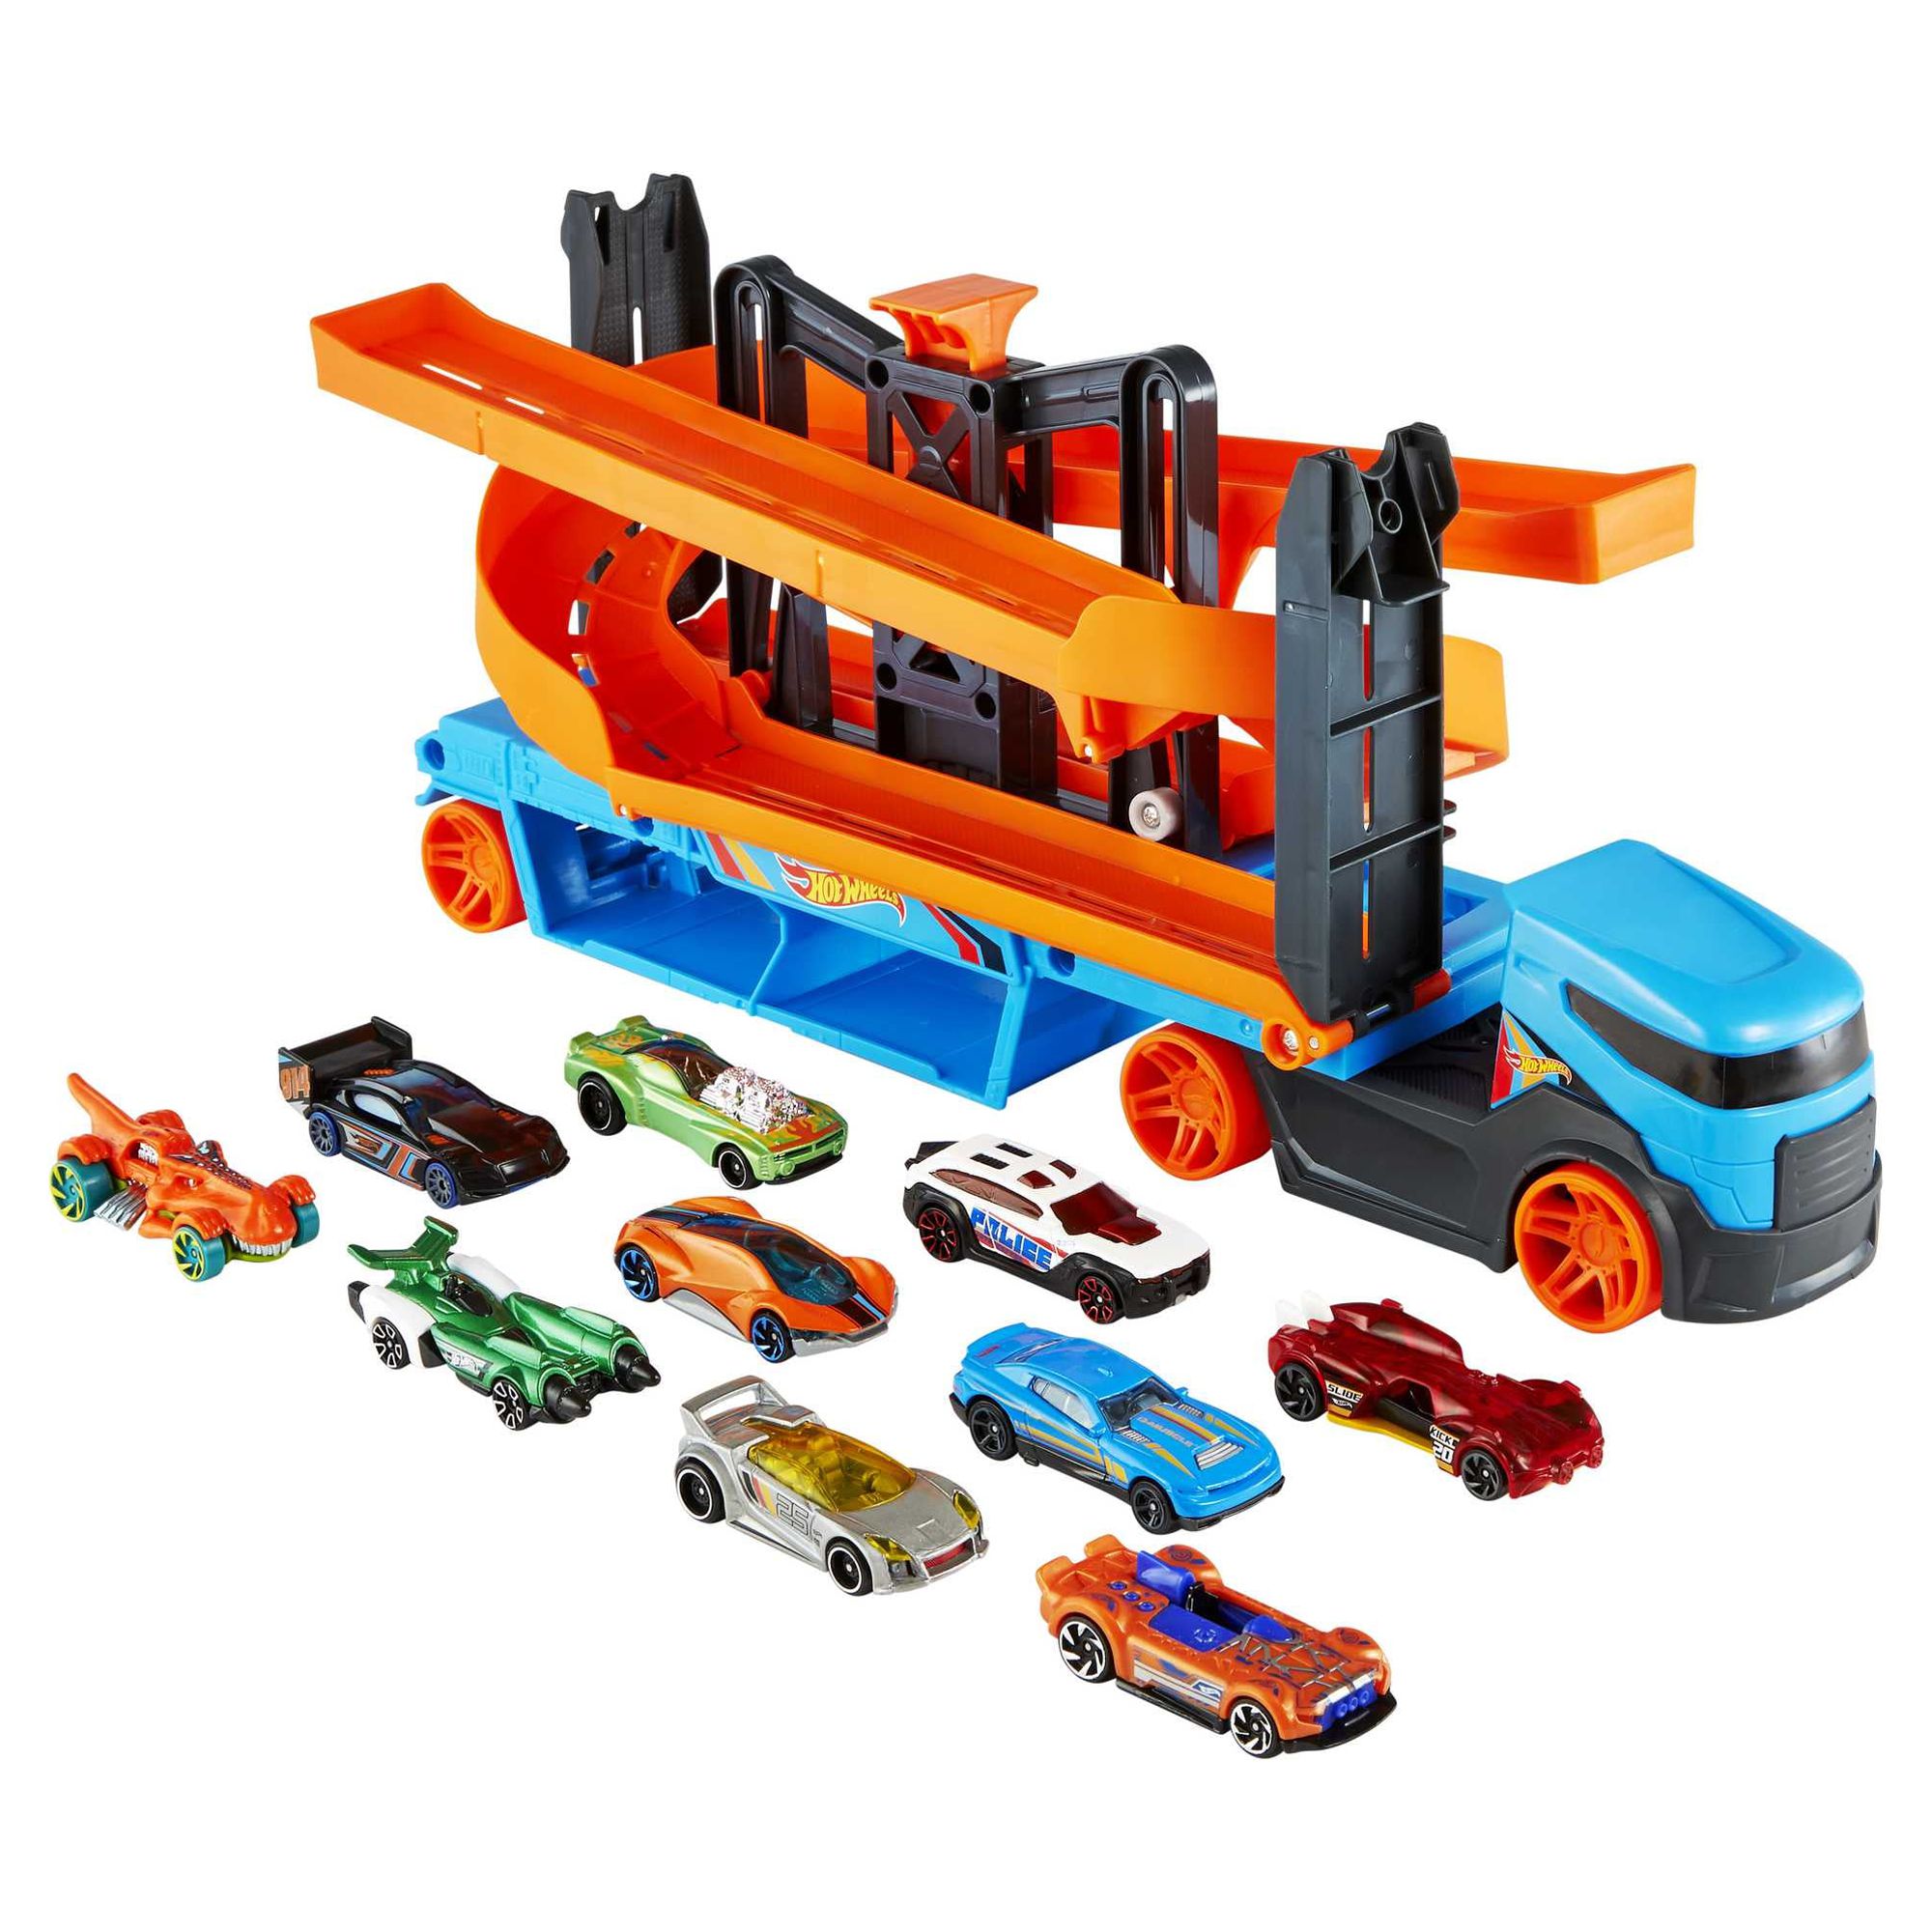 Hot Wheels Lift & Launch Hauler Toy Truck with 10 Cars in 1:64 Scale, Transporter Stores 20 Vehicles - image 1 of 6